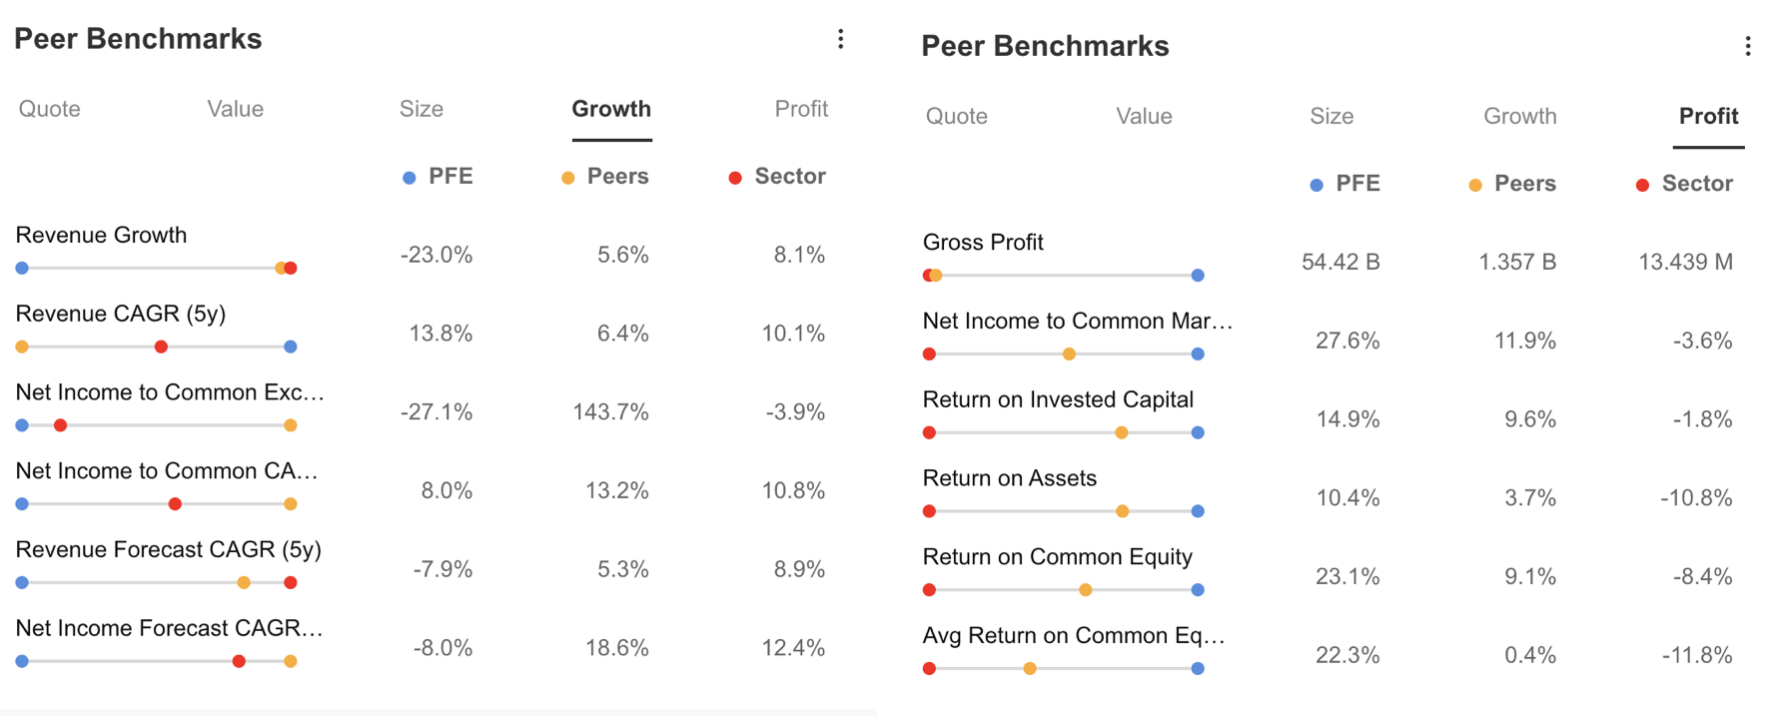 Peer Benchmarks - Growth and Profit